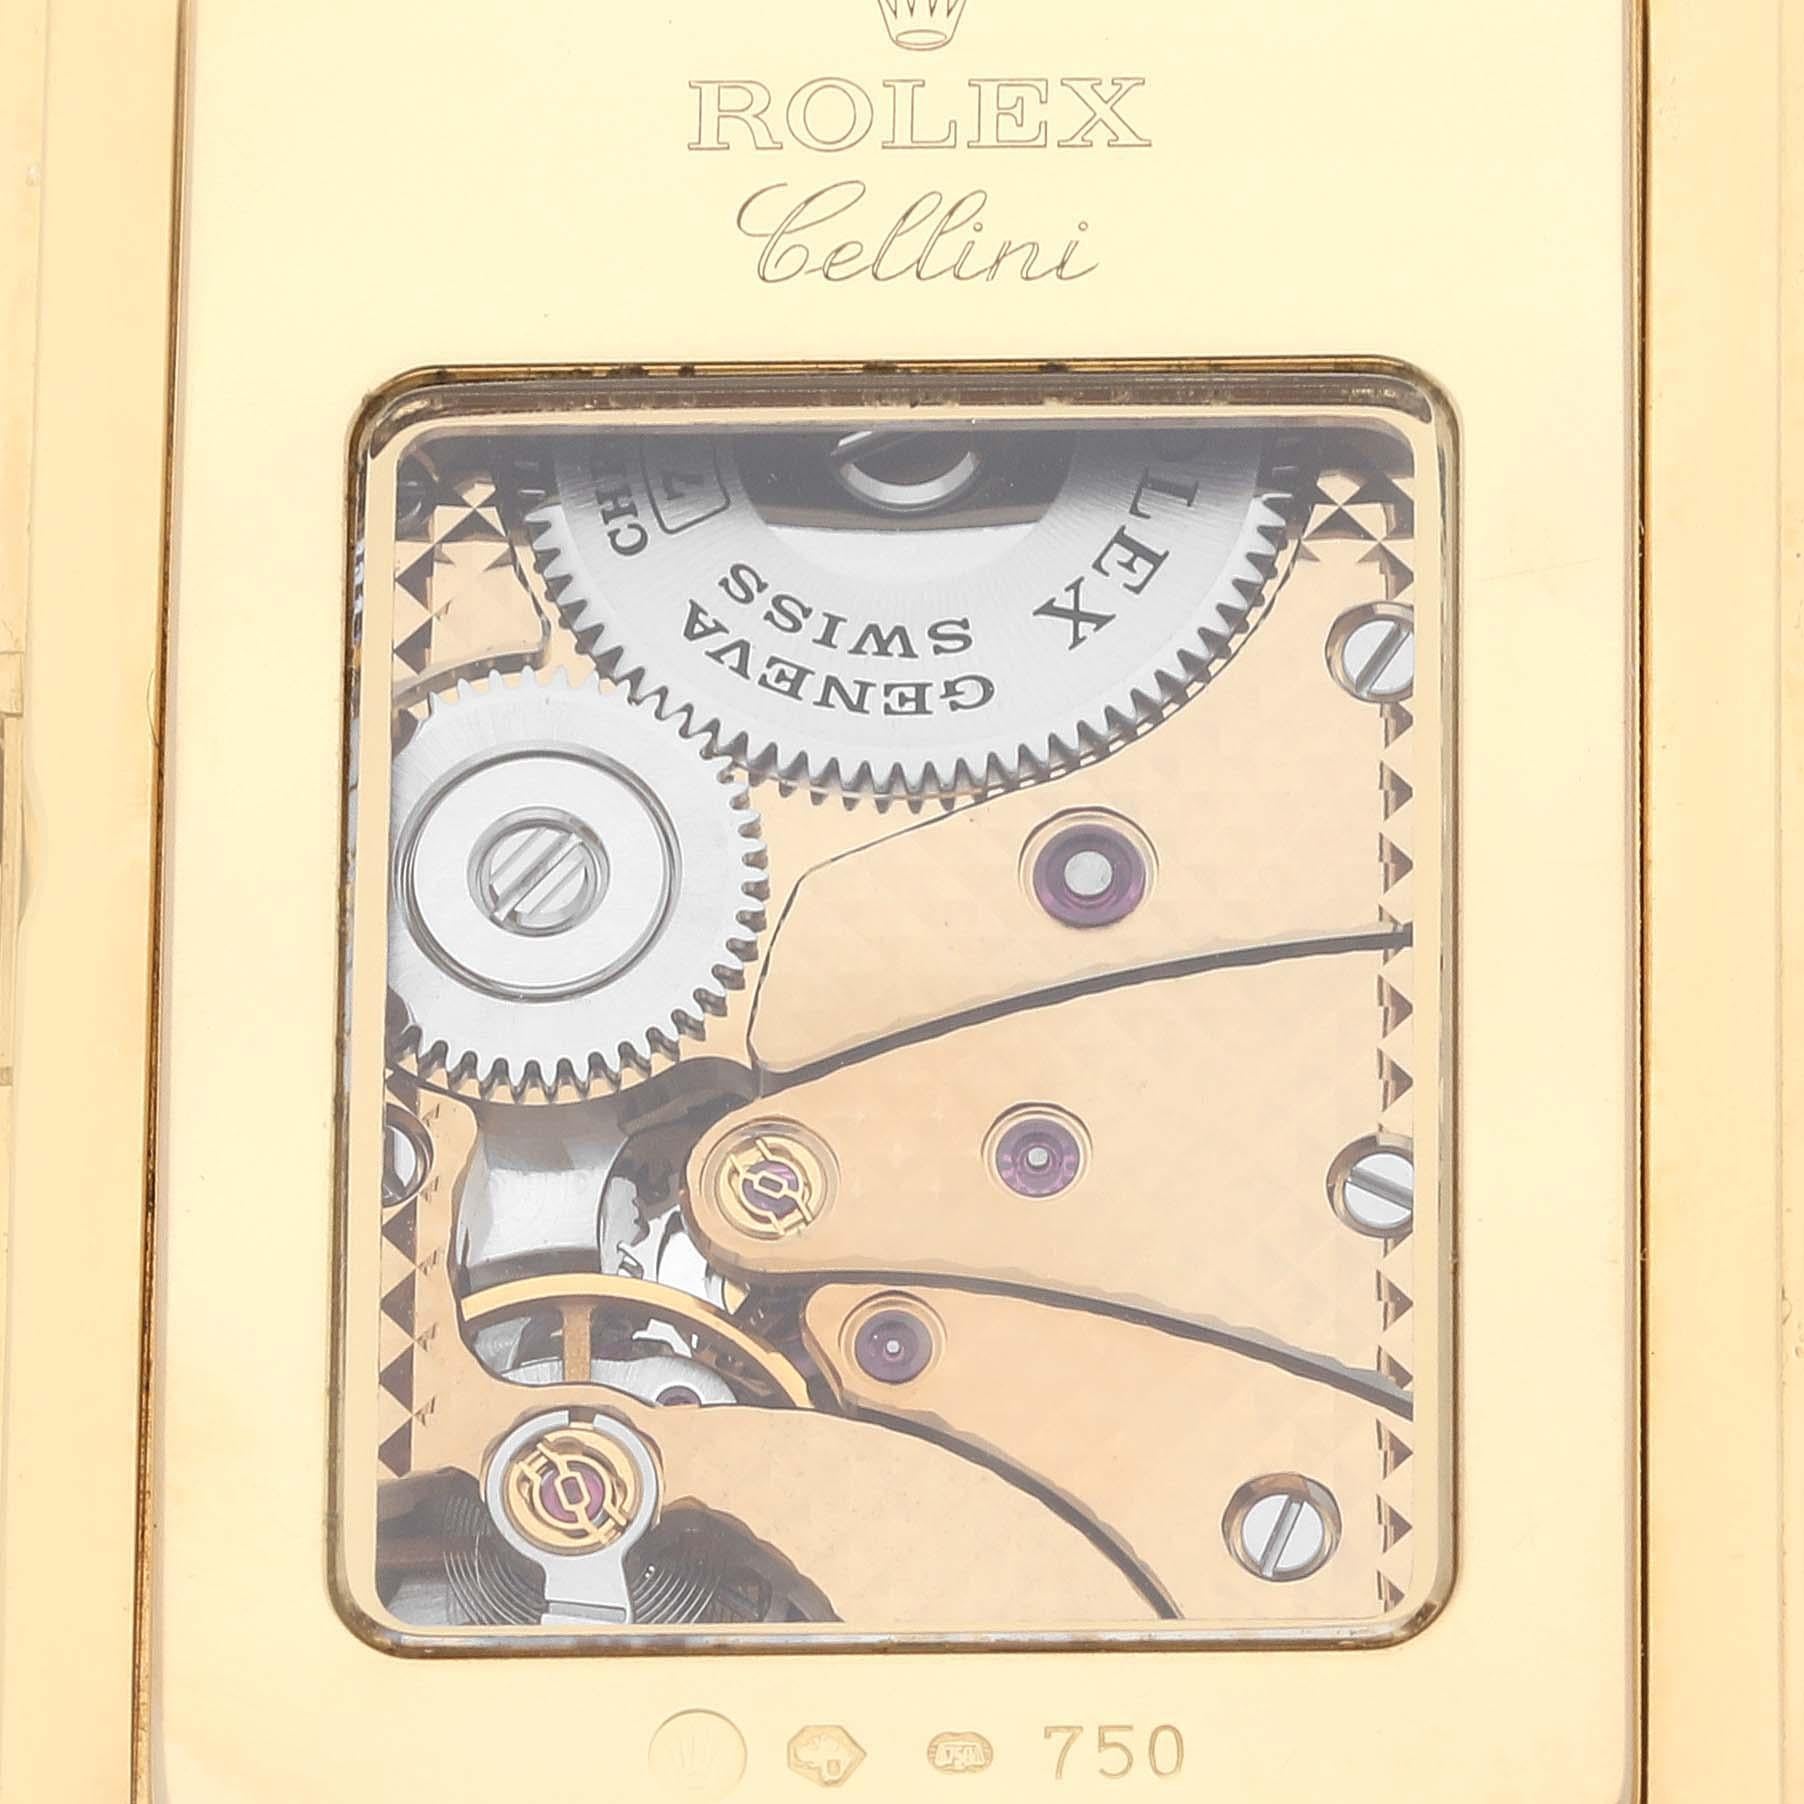 Rolex Cellini Prince Yellow Gold Champagne Roman Dial Mens Watch 5440 Box Card. Manual winding movement. 18k yellow gold case 28.0 x 47.0 mm. Rolex logo on a crown. Exhibition transparent sapphire crystal case back. . Scratch resistant sapphire